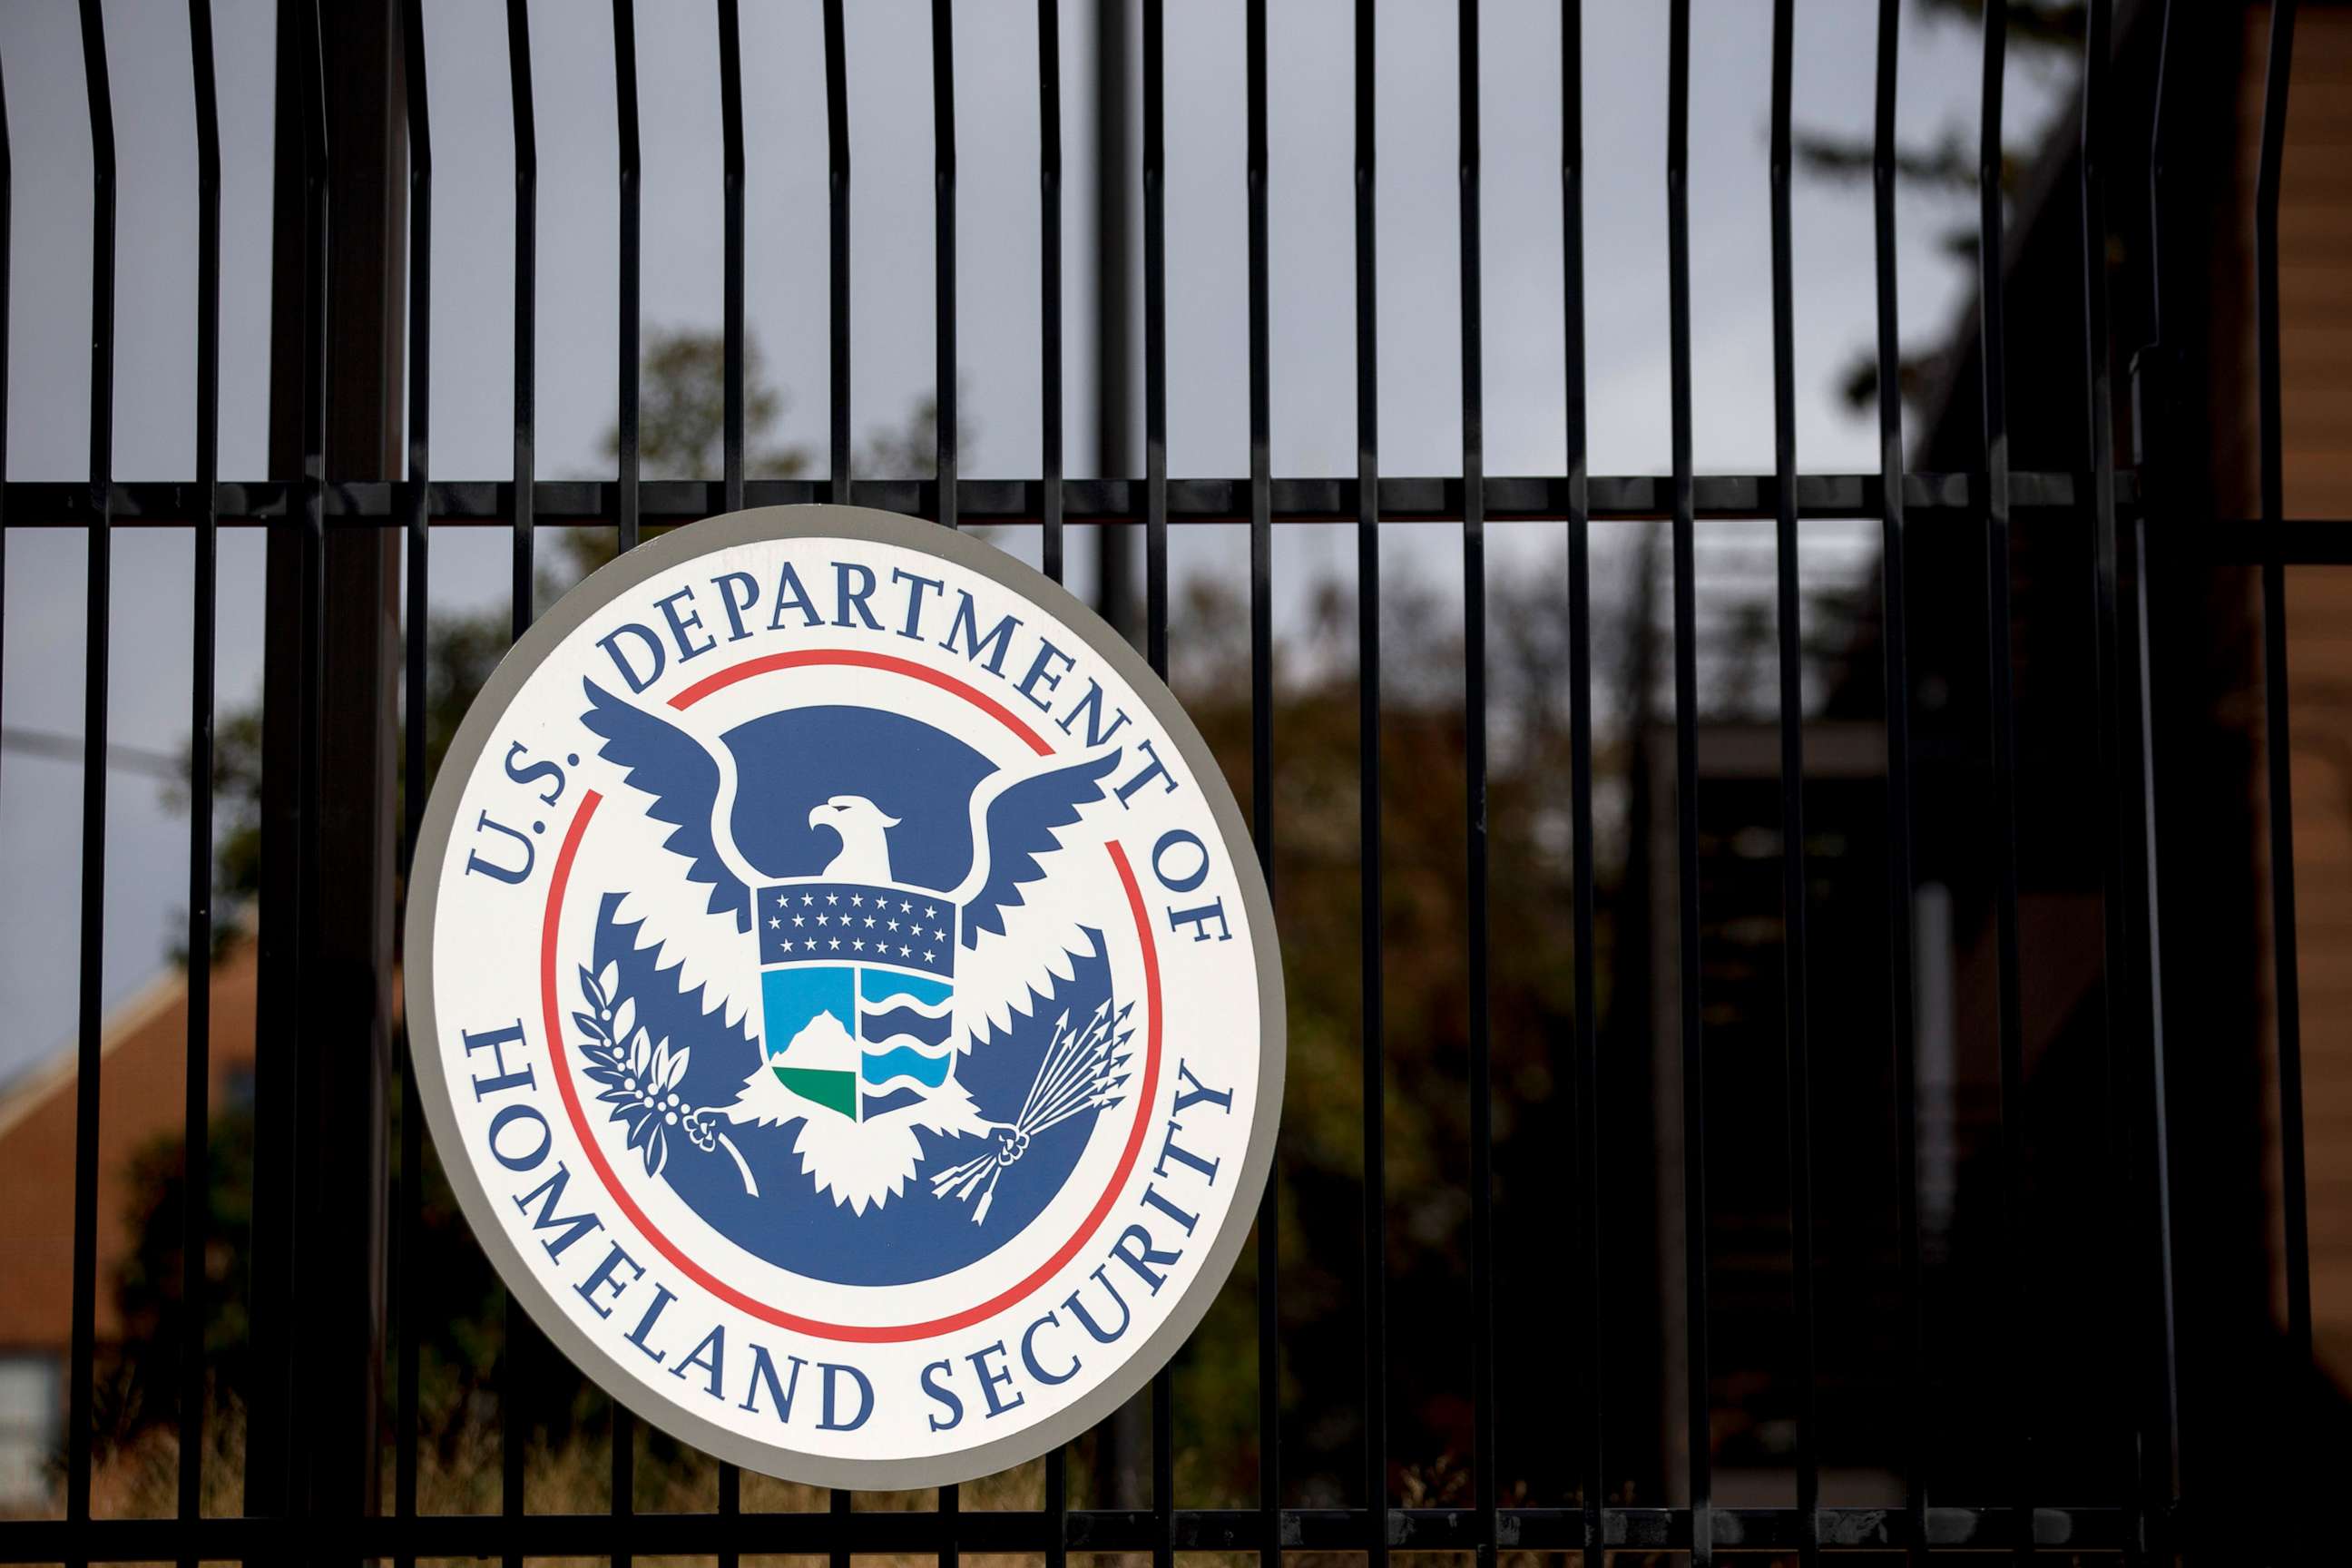 PHOTO: In this Dec. 11, 2014, file photo, the U.S. Department of Homeland Security (DHS) seal hangs on a fence at the agency's headquarters in Washington, D.C.